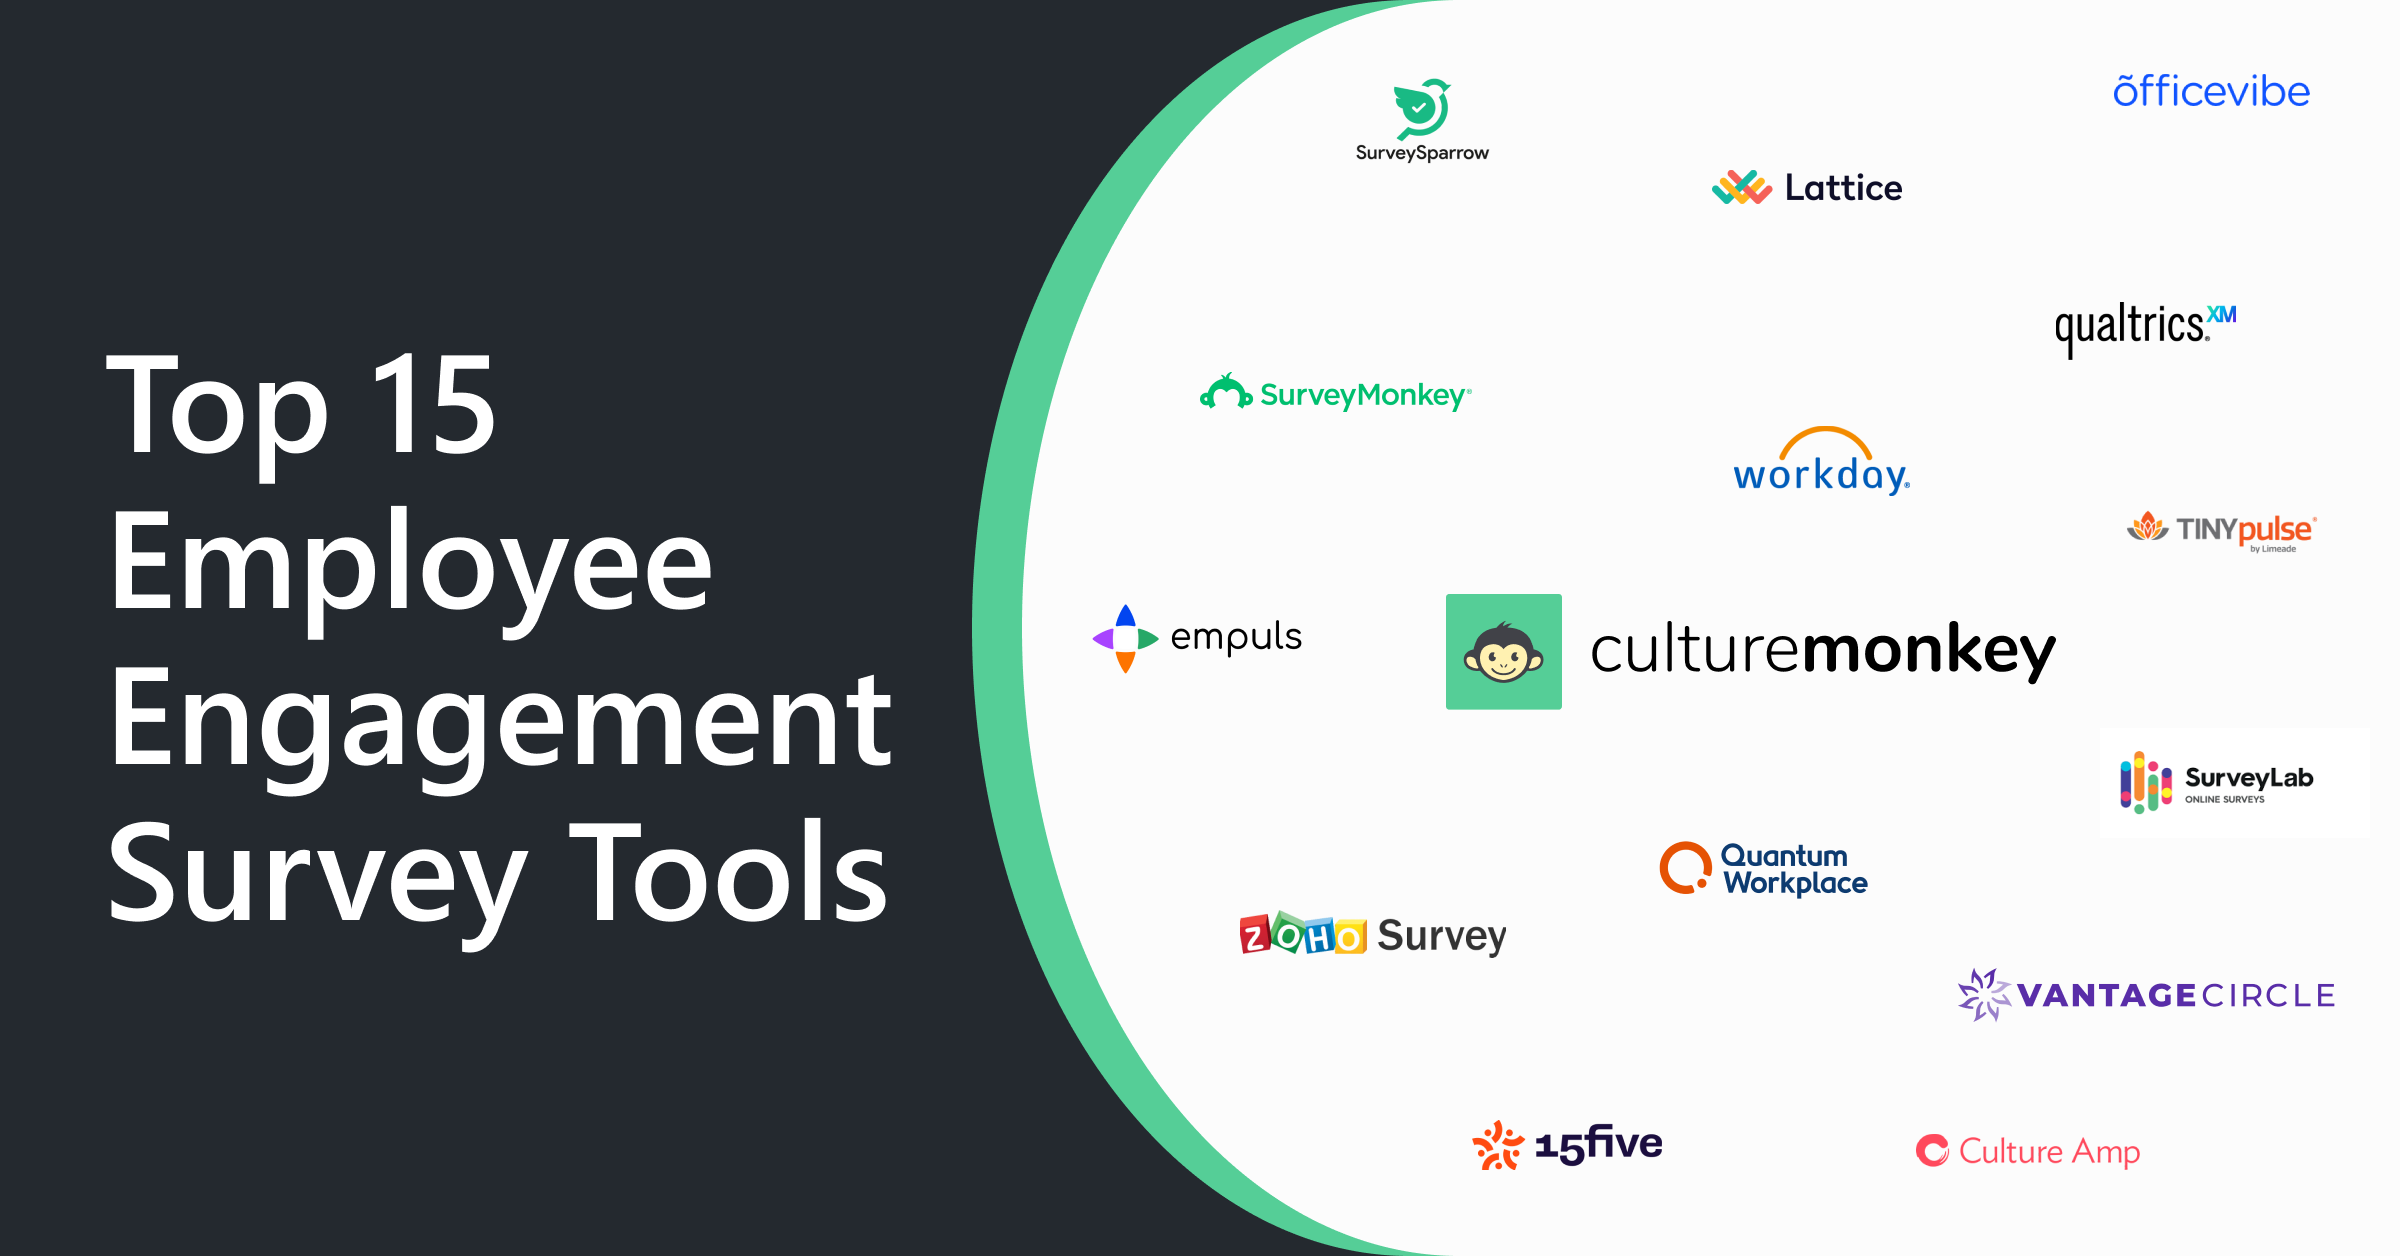 Top 15 Employee Engagement Survey Tools.